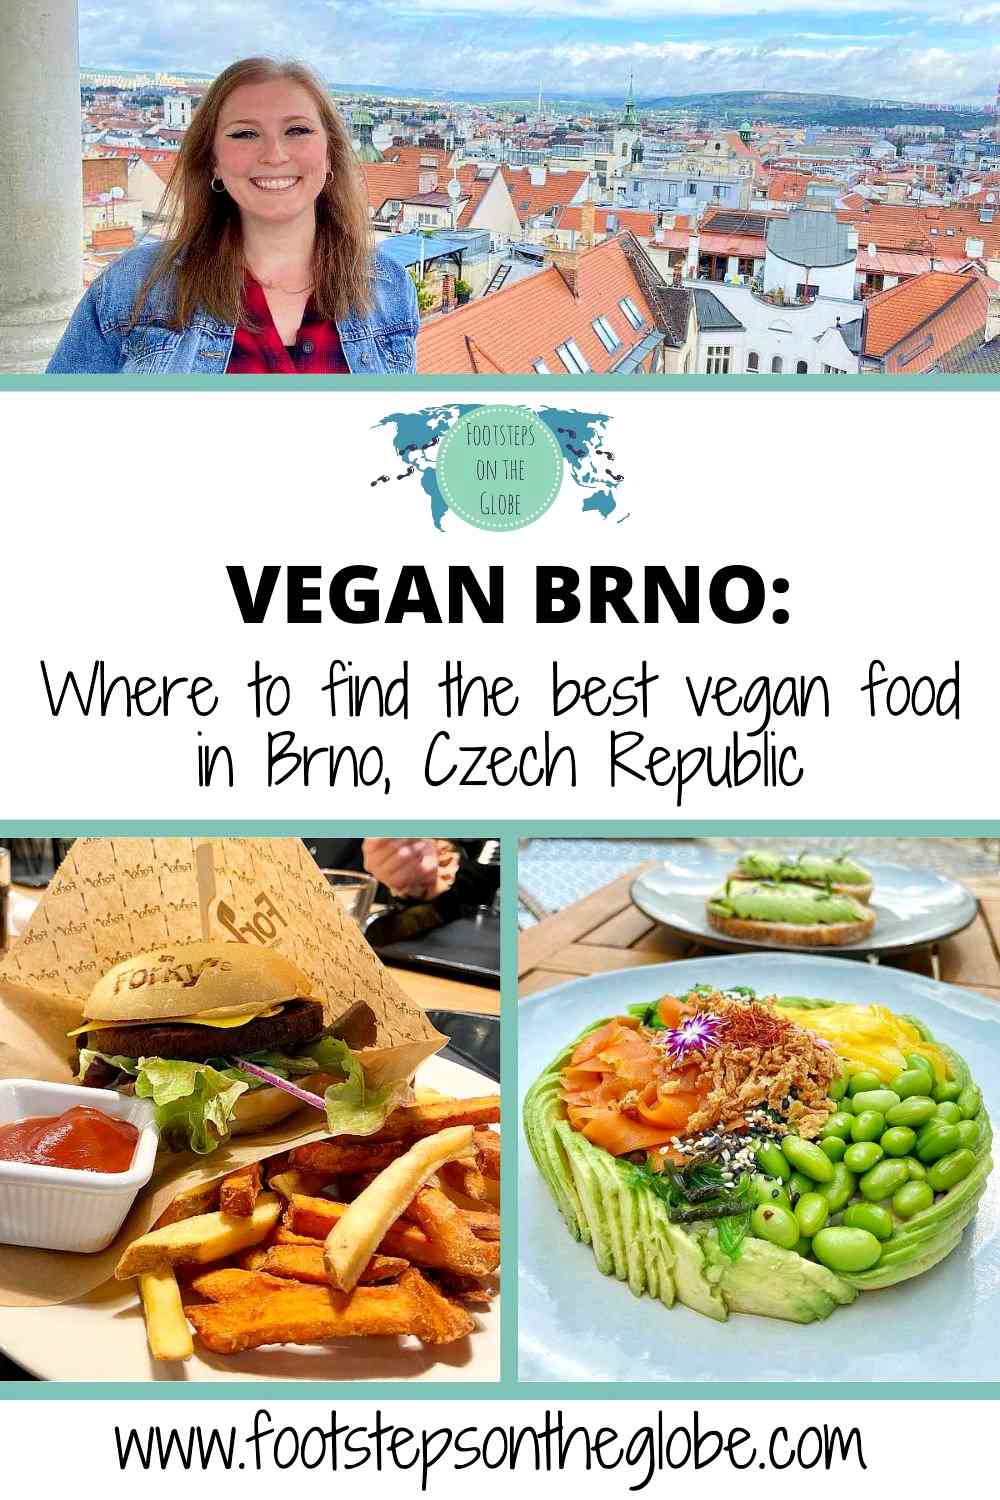 Pinterest image with the text: "Vegan Brno: Where to find the best vegan food in Brno, Czech Republic" with images of Mel with a 360 view of Brno, vegan burger and chips and avocado cake